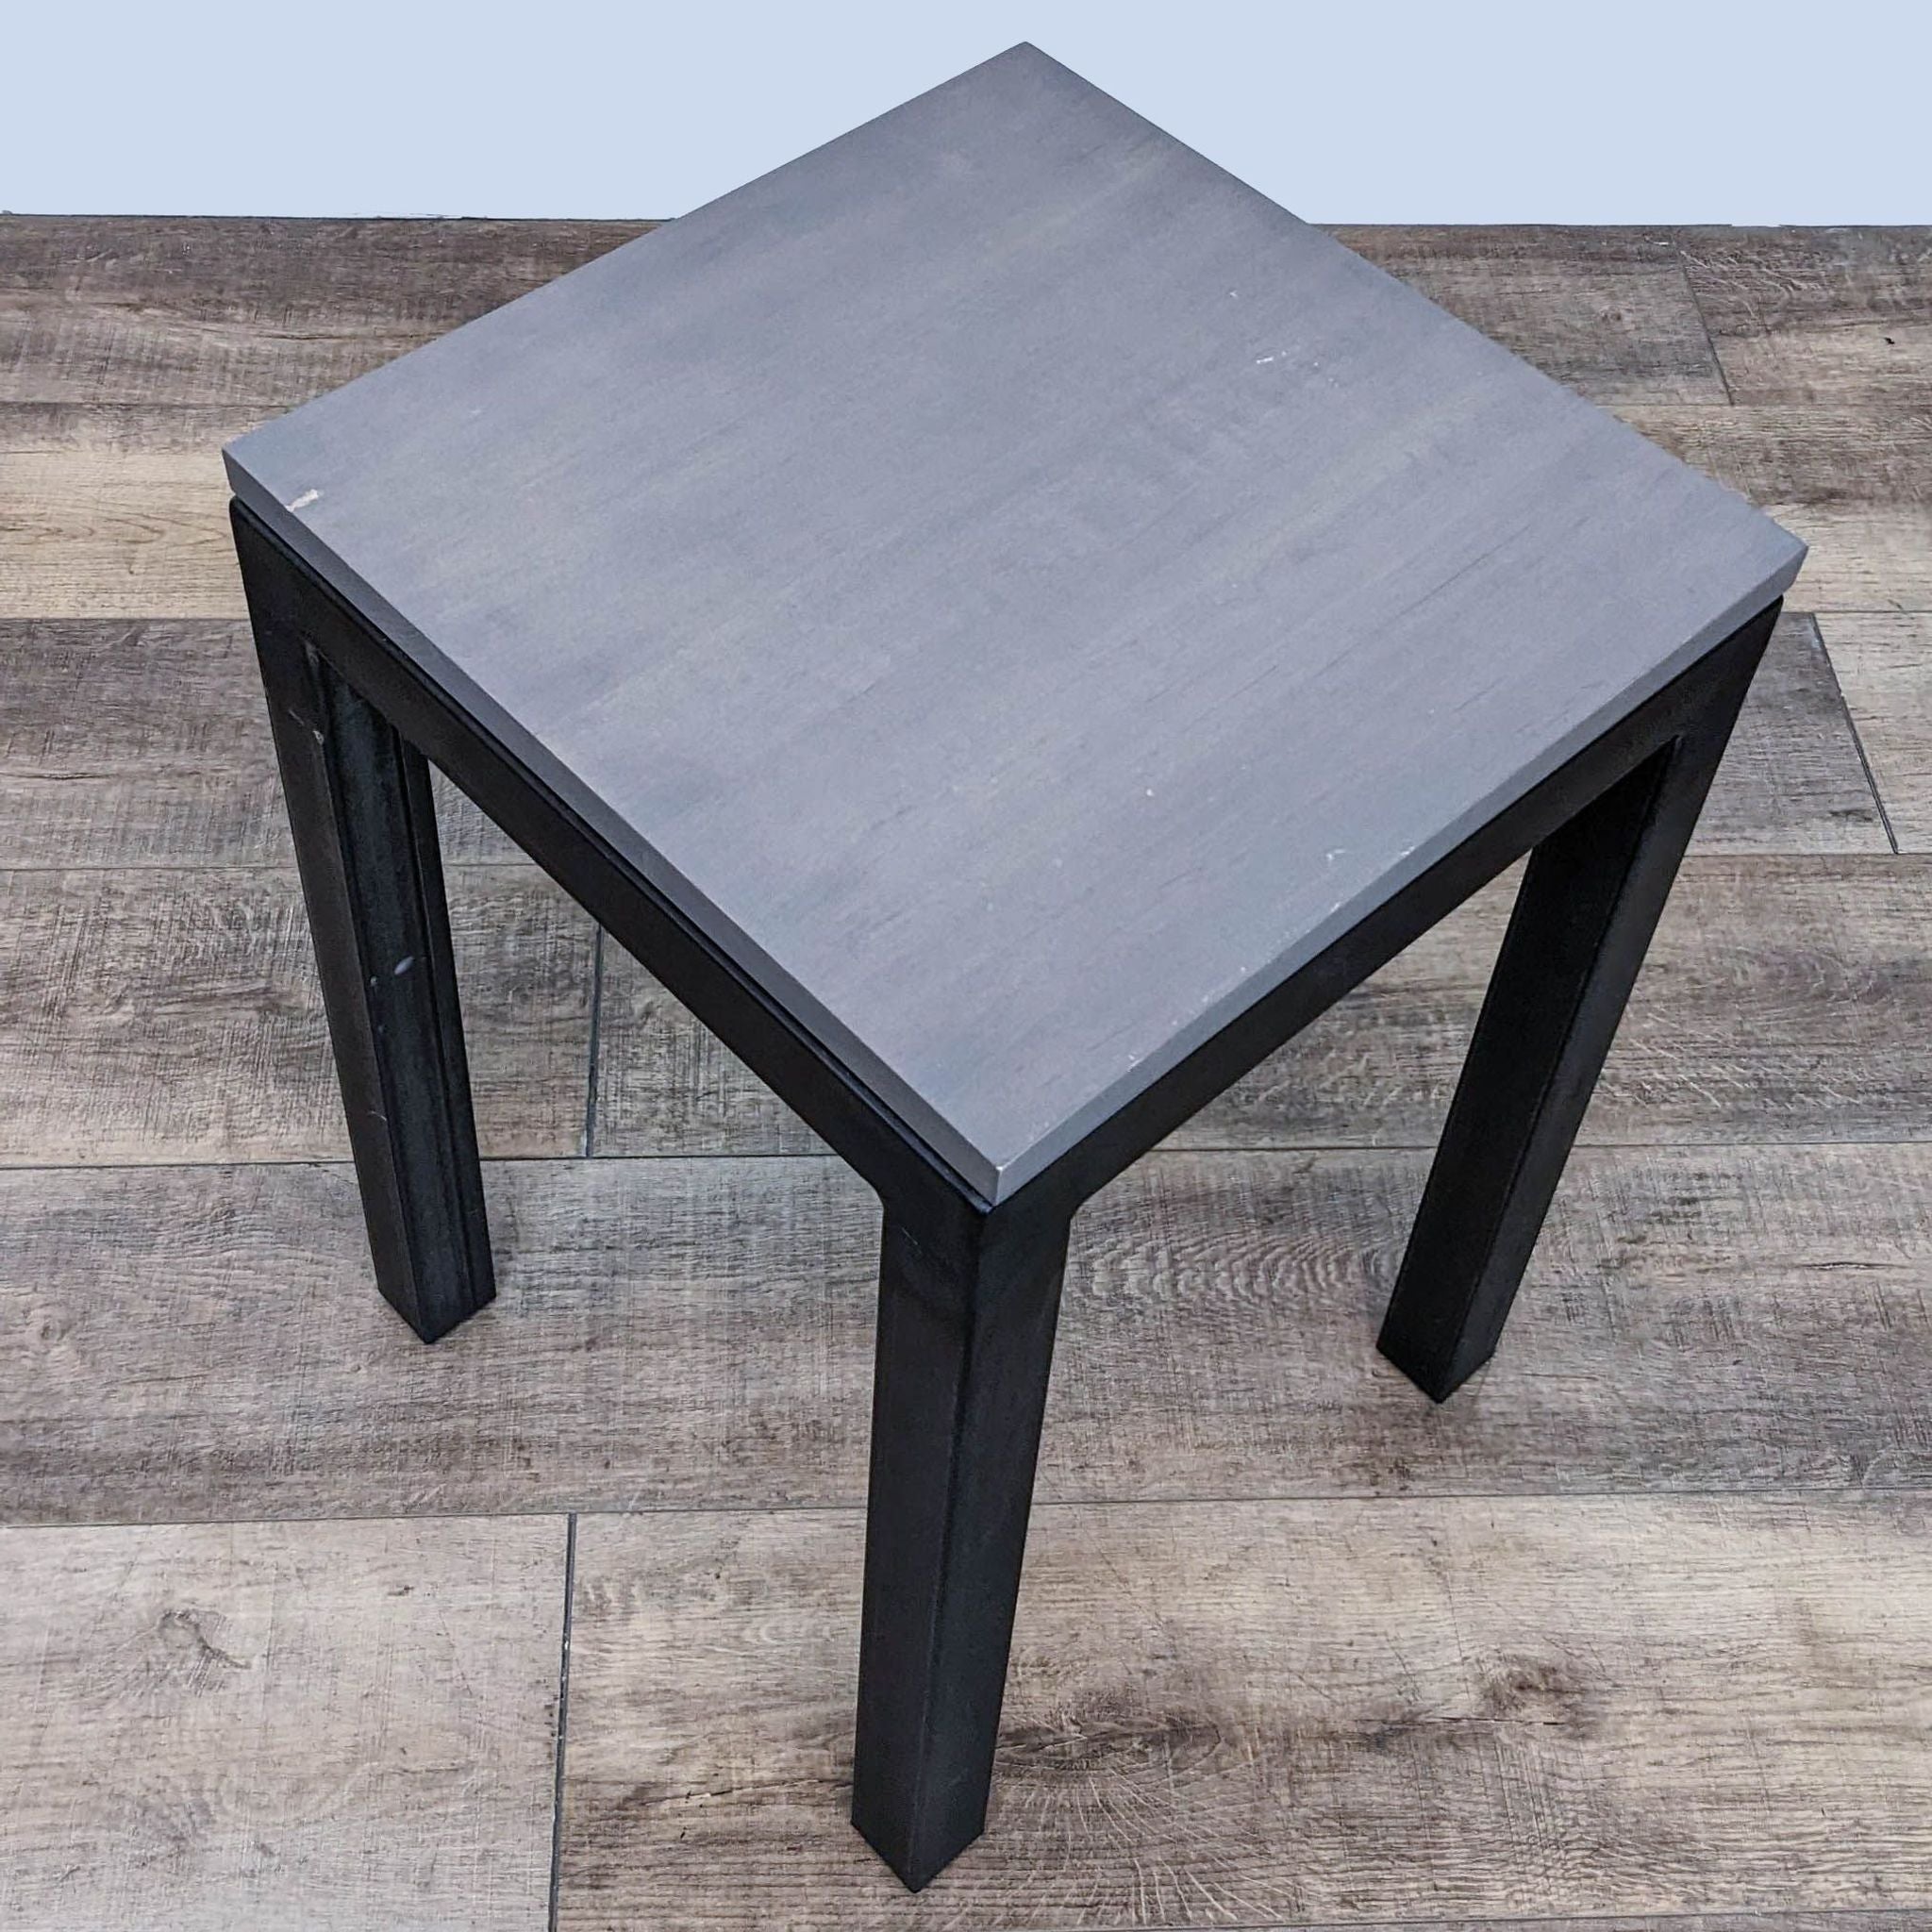 Room & Board side table with dark metal base on a wooden floor.